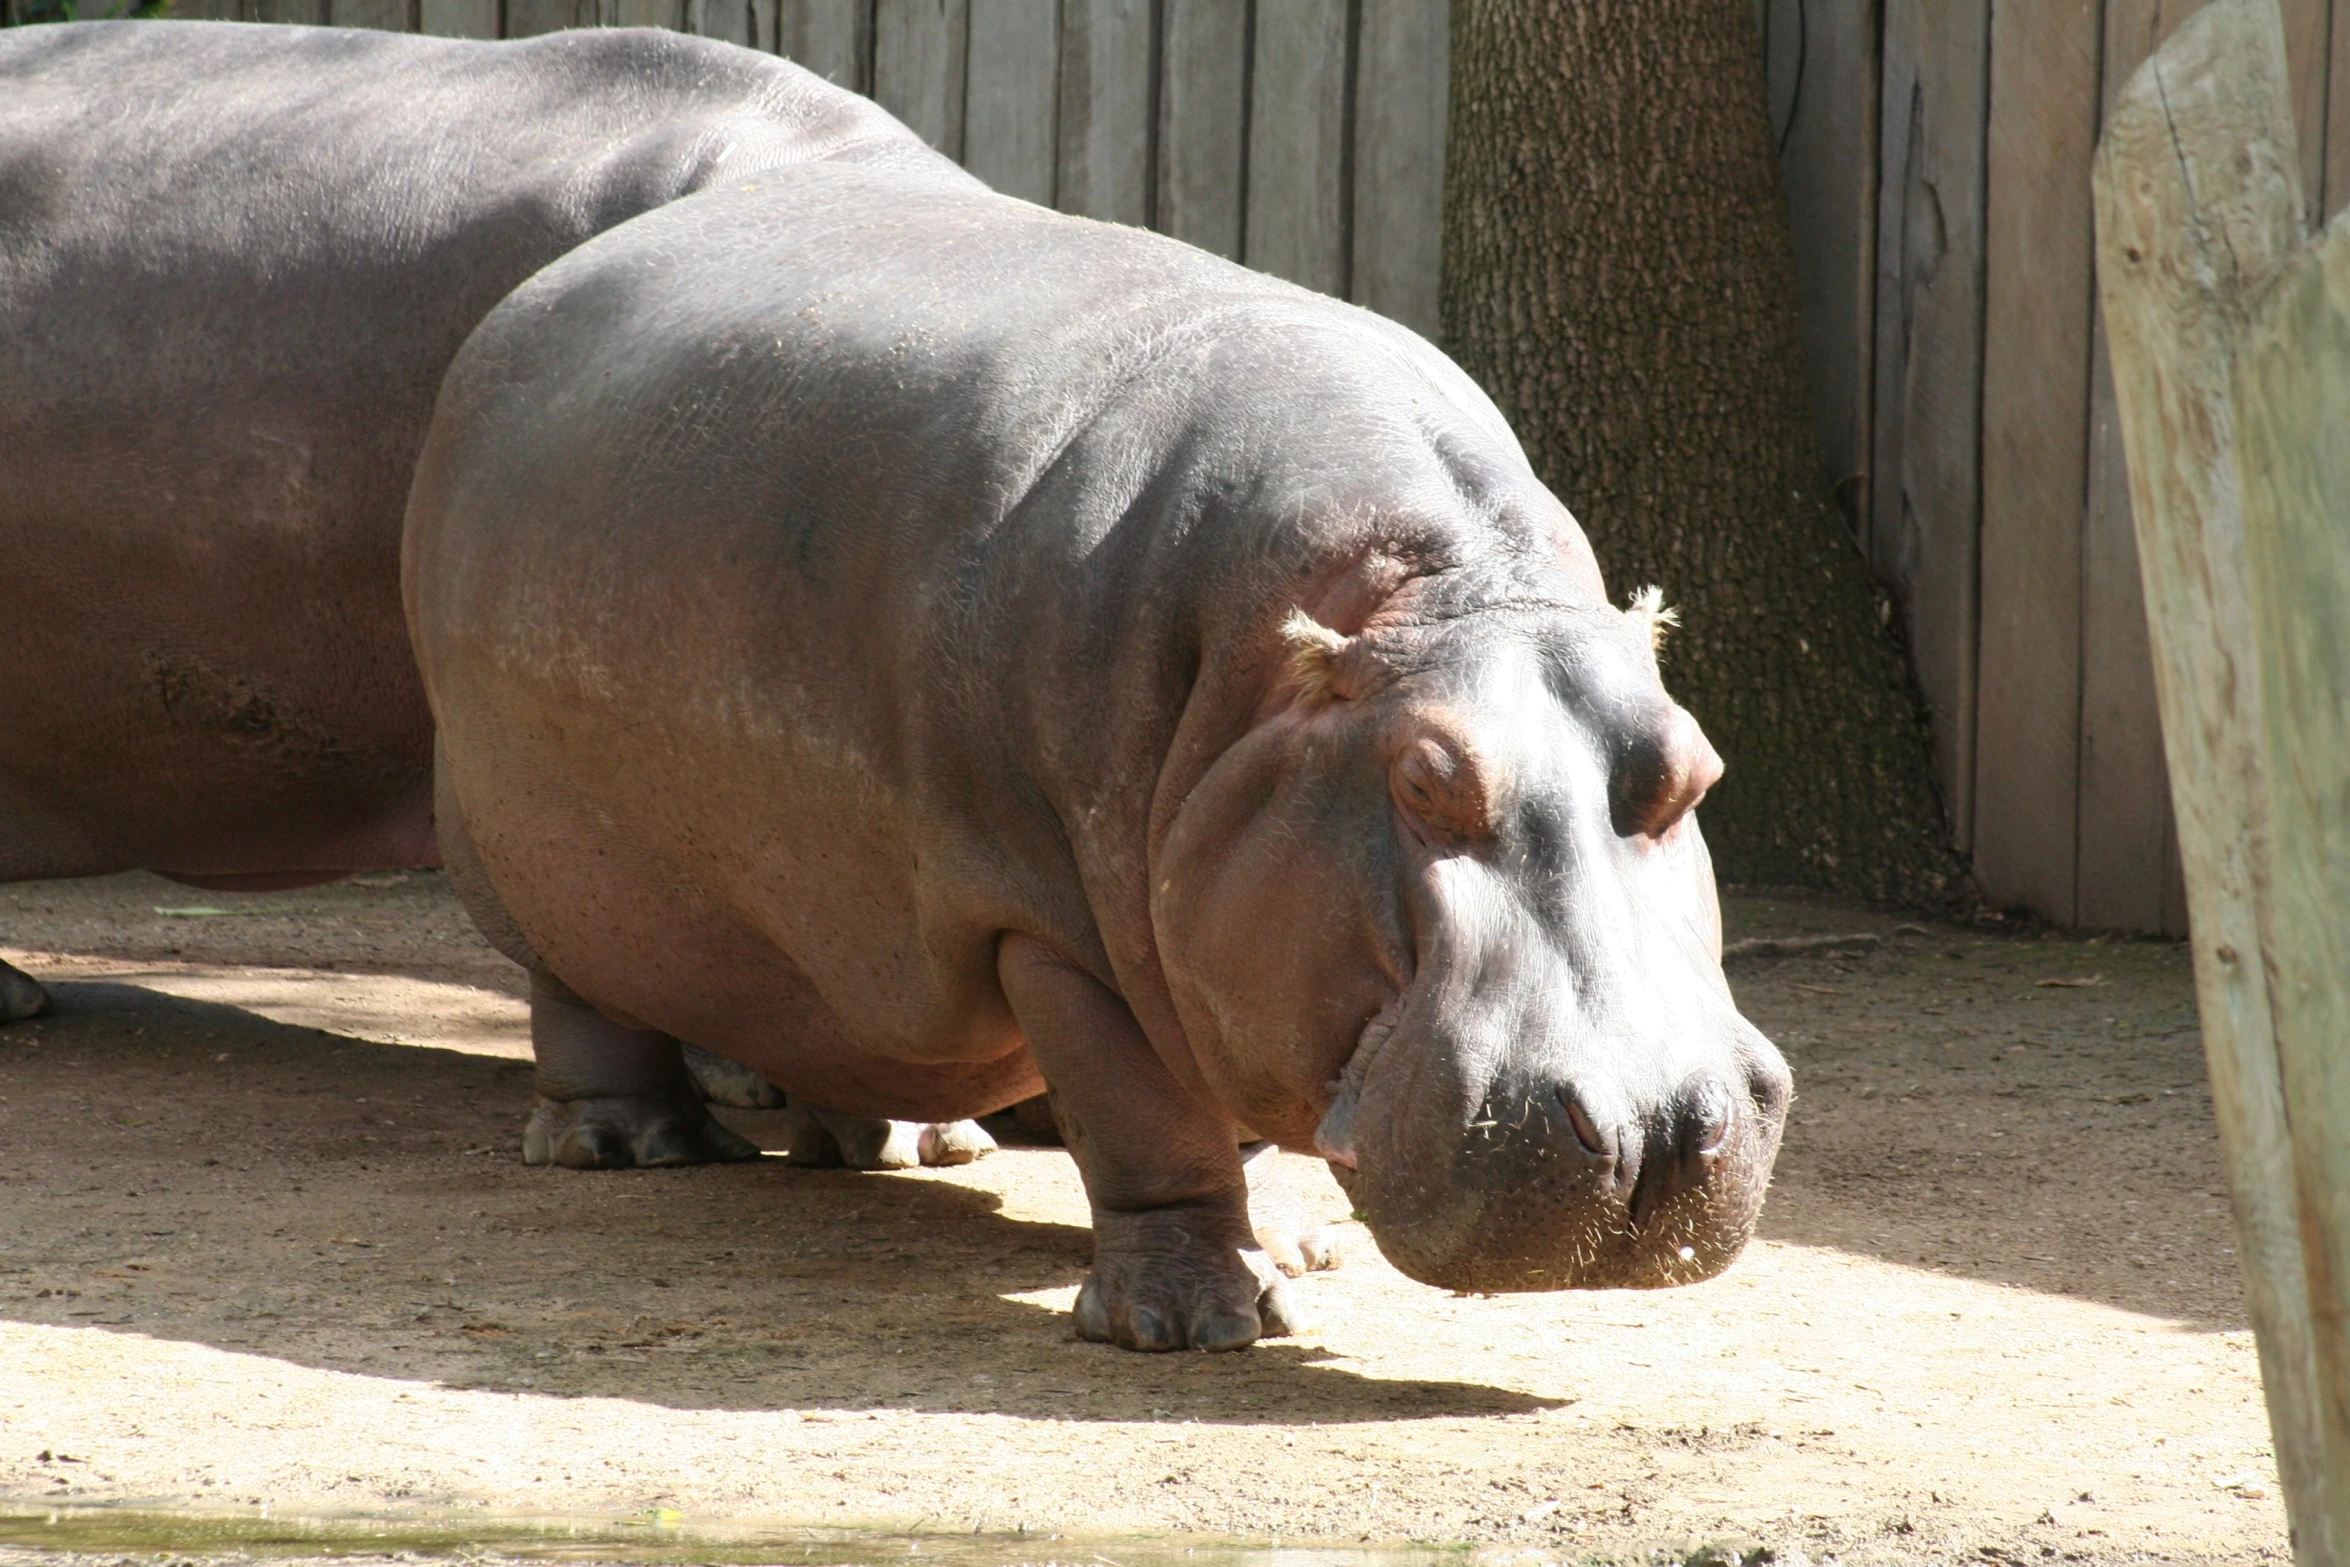 the hippopotamus was in an enclosure at the zoo